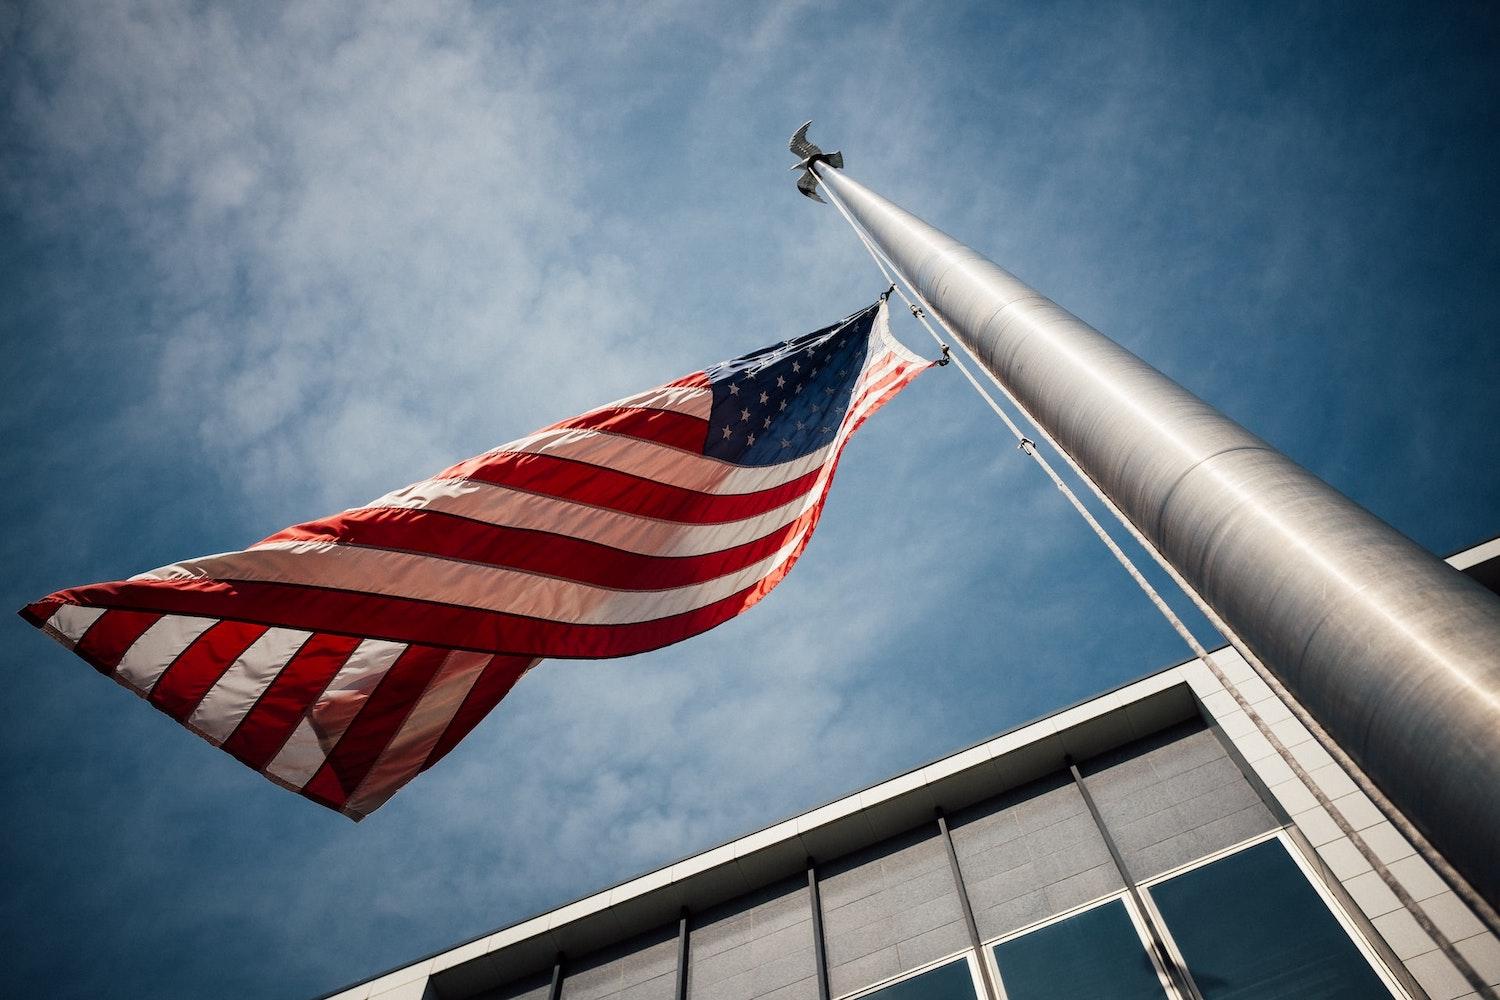 American flag on flag pole - ESG movement and the midterm elections